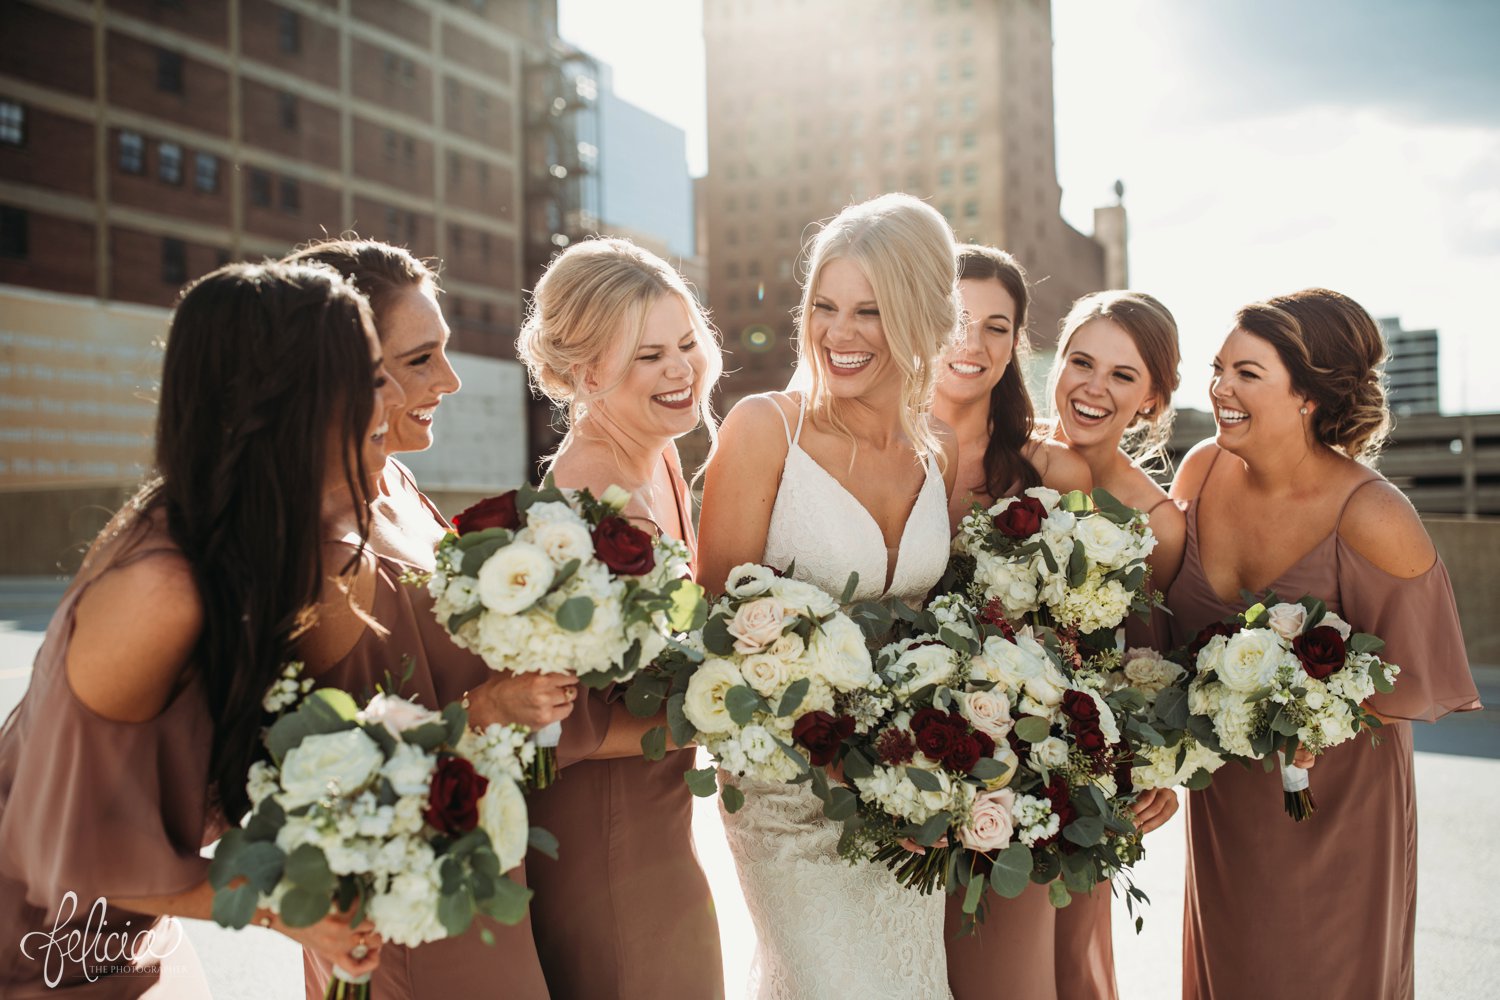 images by feliciathephotographer.com | destination wedding photographer | kansas city | best friends | laughter | natural light | mauve | light pink and red | bella bridesmaids | lace gown | fabulous frocks | full dramatic florals | wild hill | rooftop | urban | 